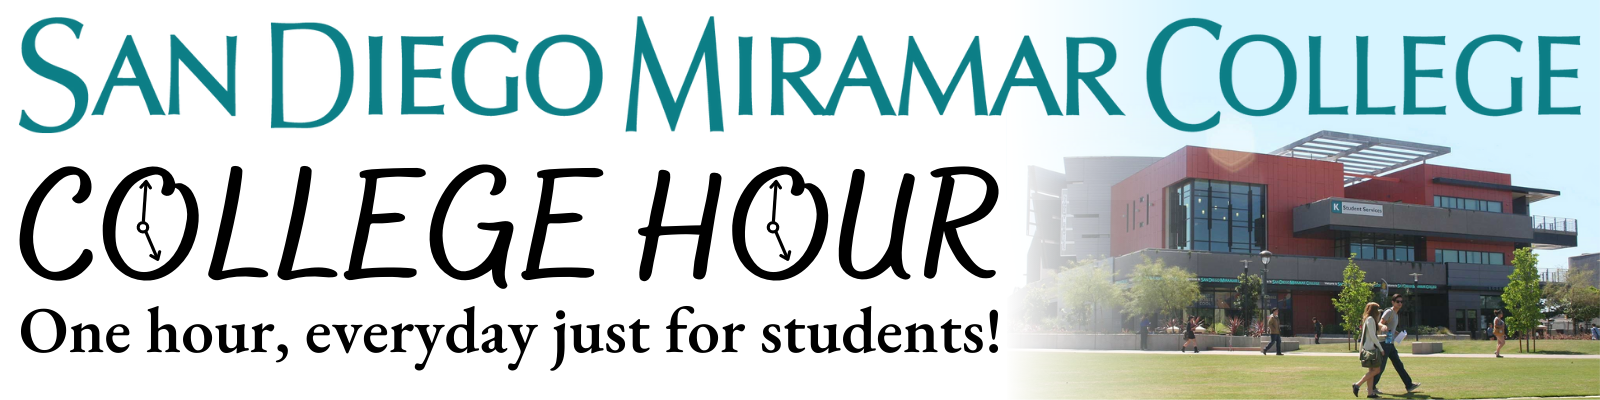 Graphic which reads, "San Diego Miramar College: College Hour. One hour, everyday just for students!" The graphic includes an image of people walking around campus in front of the Student Services Building.